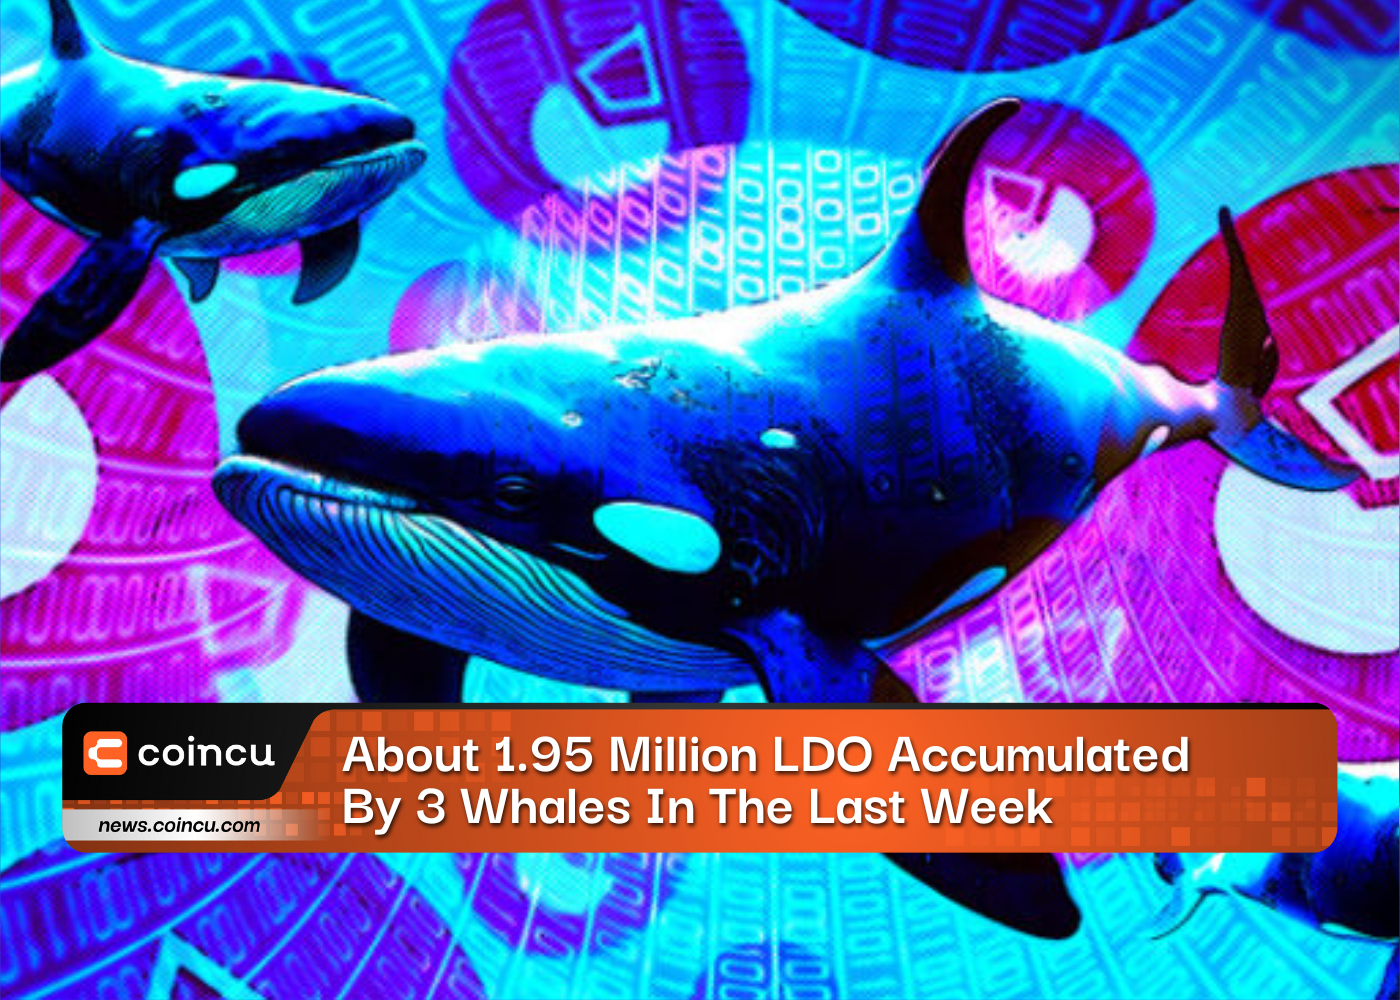 About 1.95 Million LDO Accumulated By 3 Whales In The Last Week